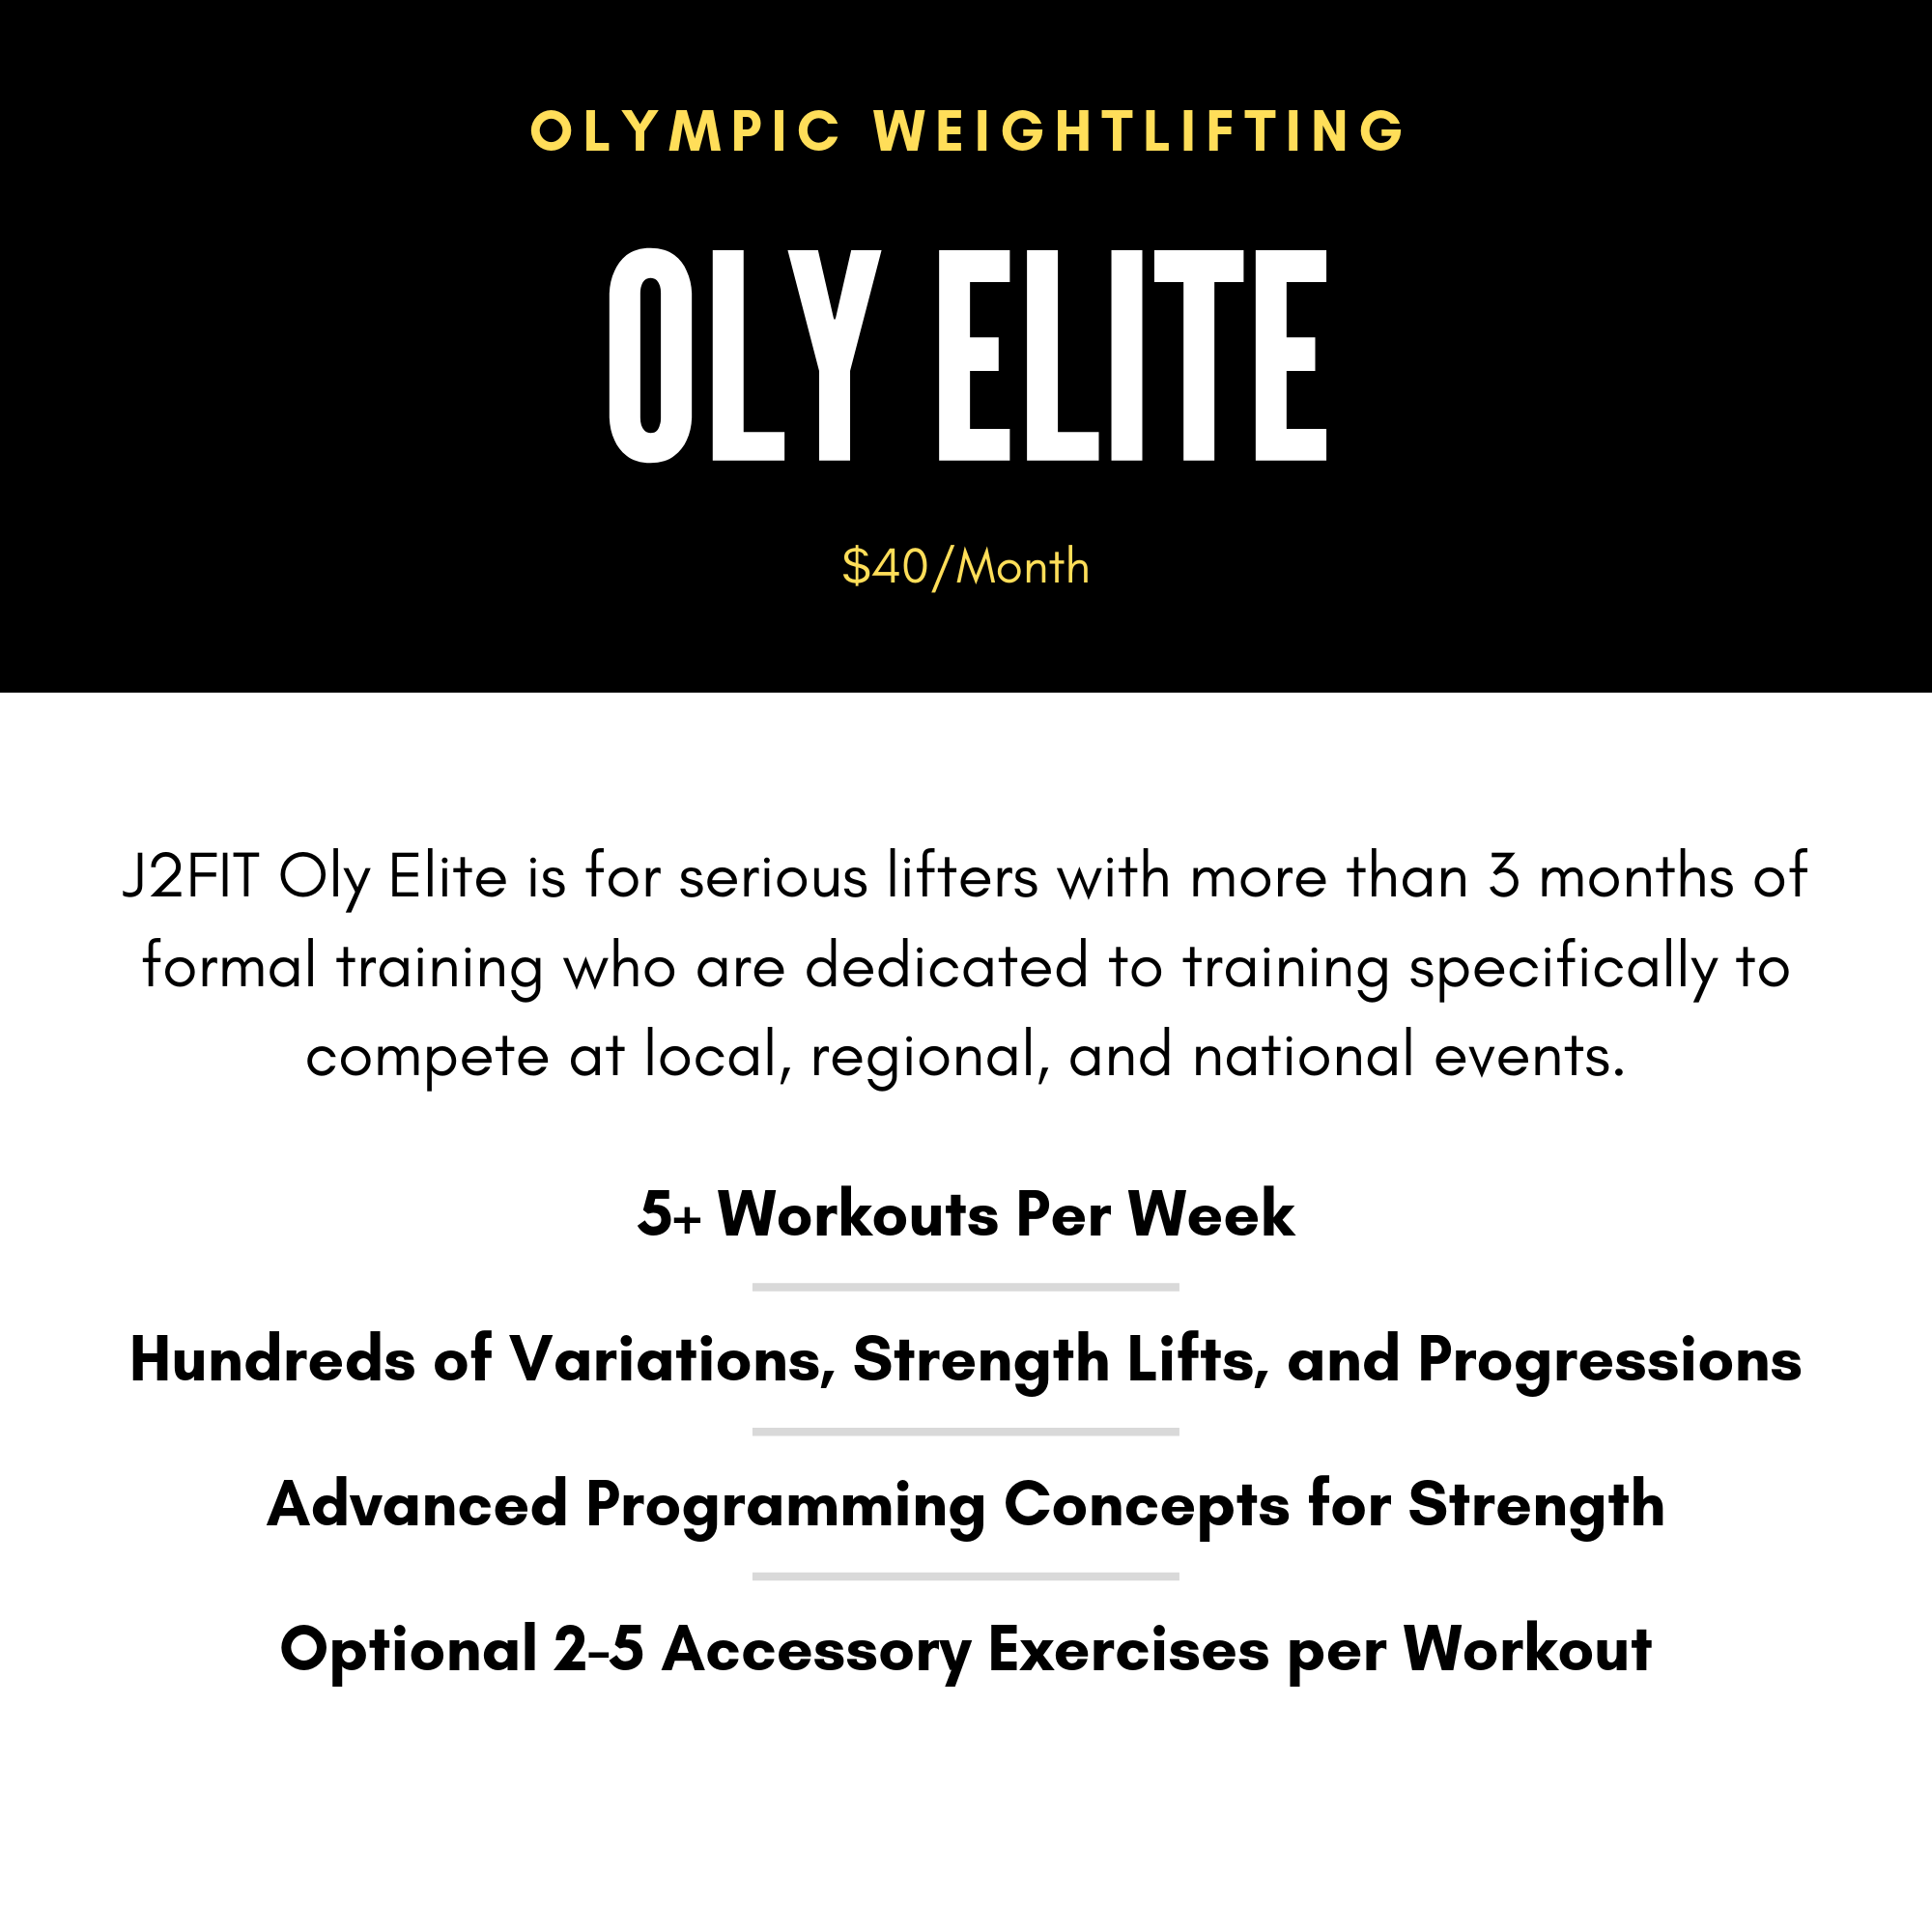 Olympic Weightlifting Workout Plans Beginner, Intermediate, and Advanced Programs — J2FIT